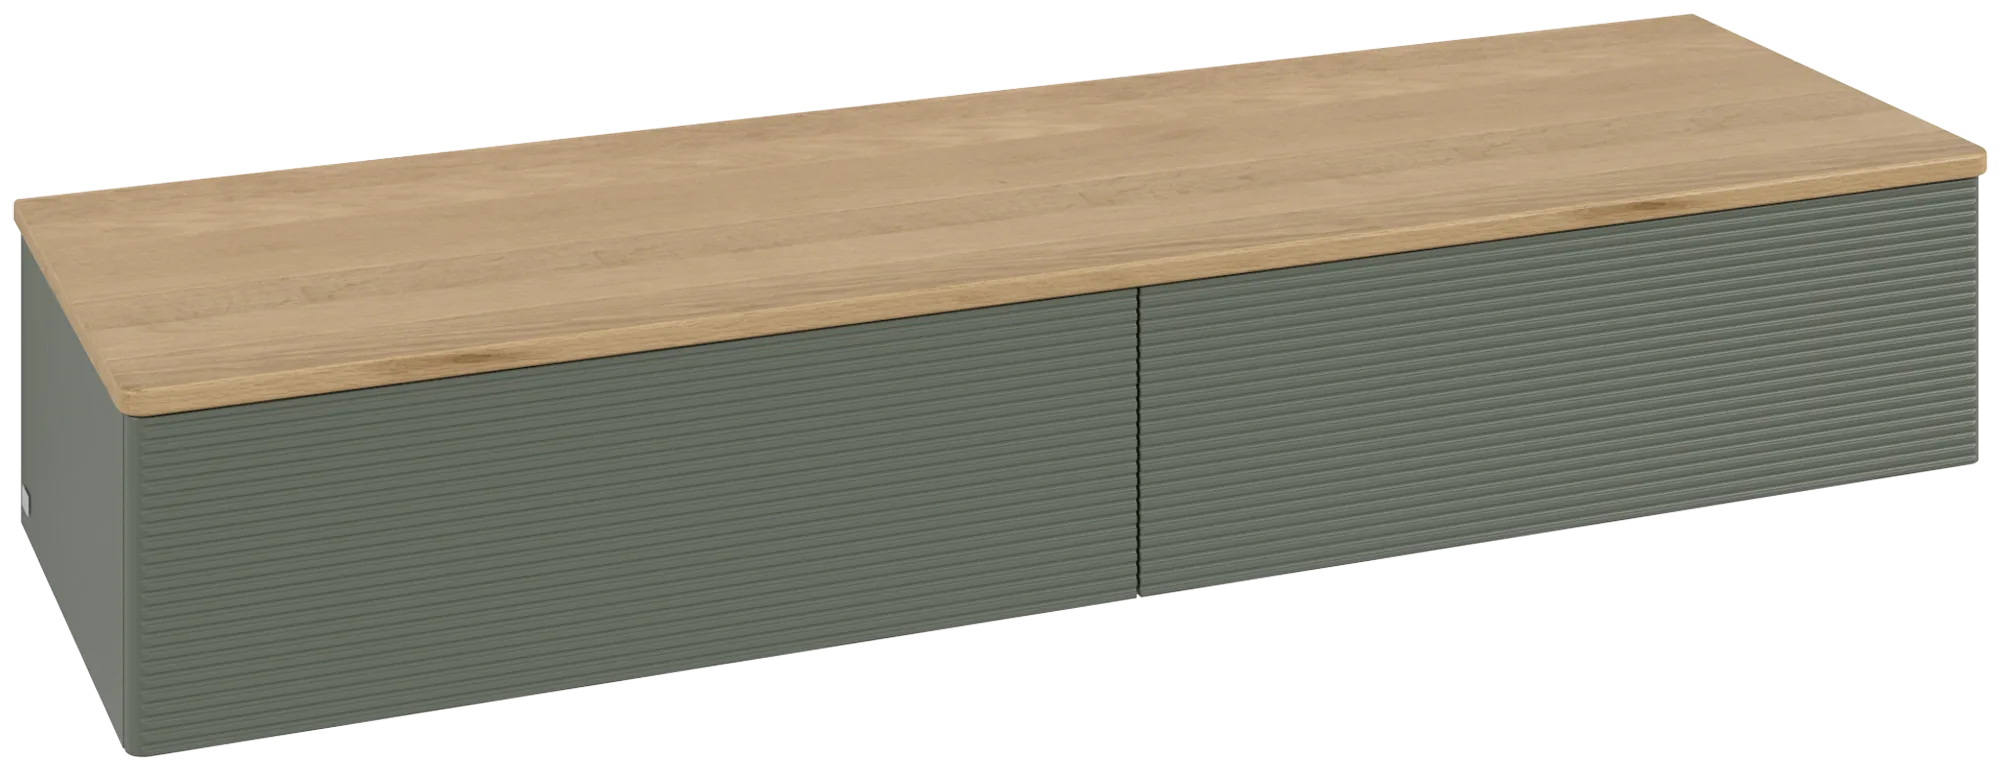 Obrázek VILLEROY BOCH Antao Sideboard, 2 pull-out compartments, 1600 x 268 x 500 mm, Front with grain texture, Leaf Green Matt Lacquer / Honey Oak #K42101HL